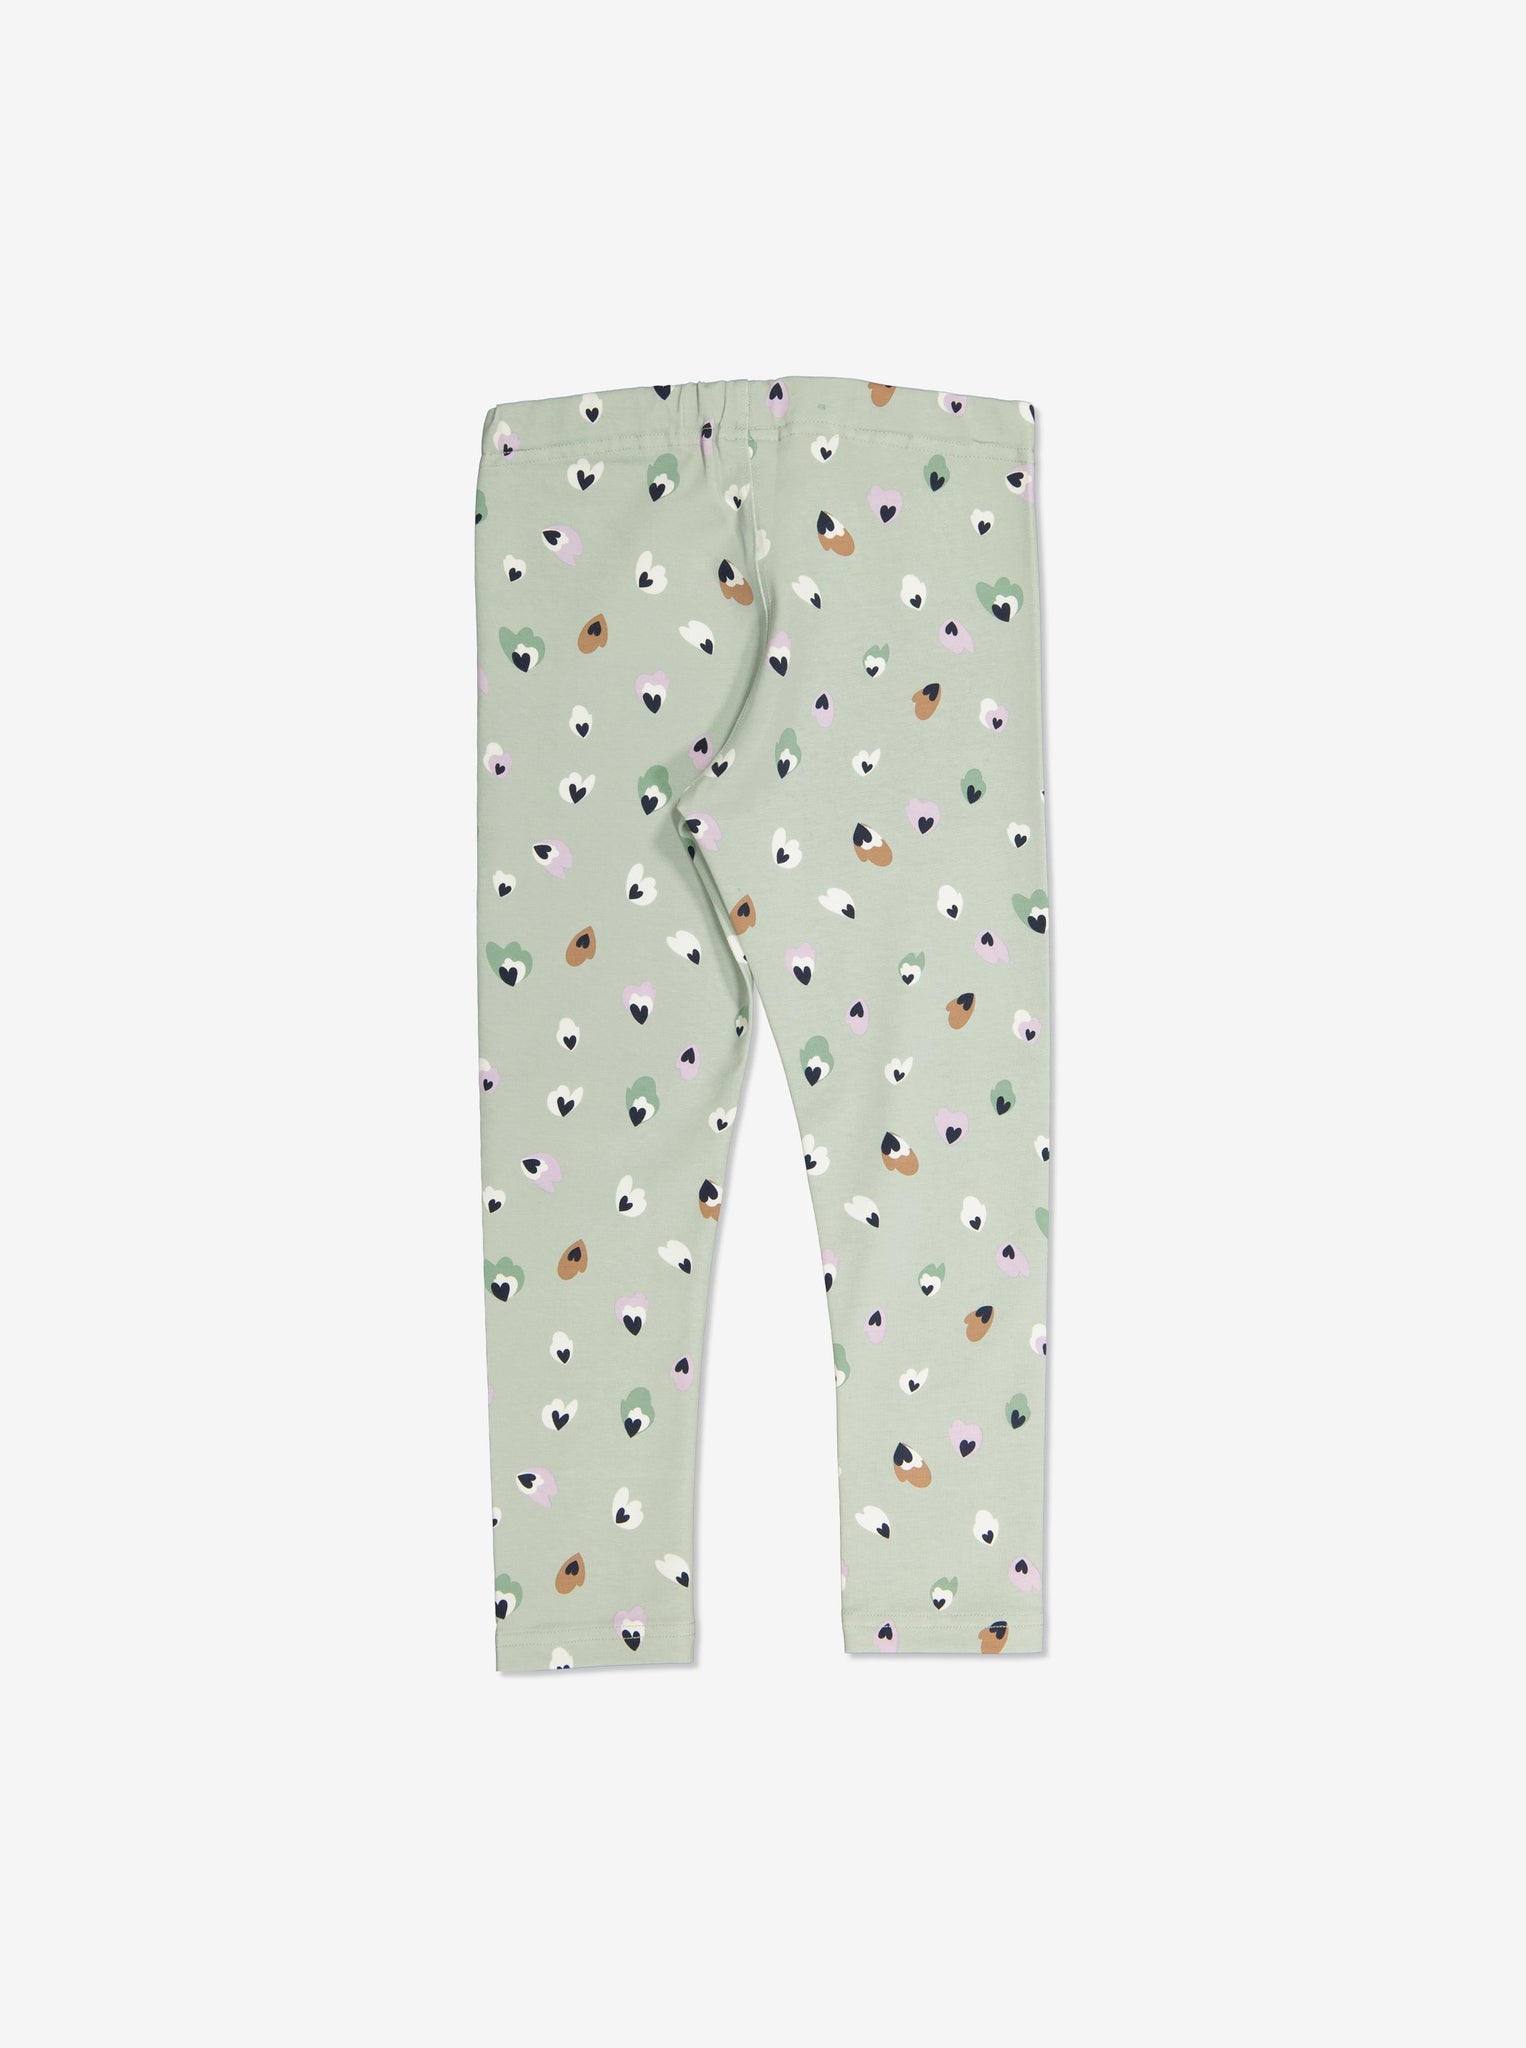  Organic Green Kids Heart Leggings from Polarn O. Pyret Kidswear. Made from sustainably sourced materials.